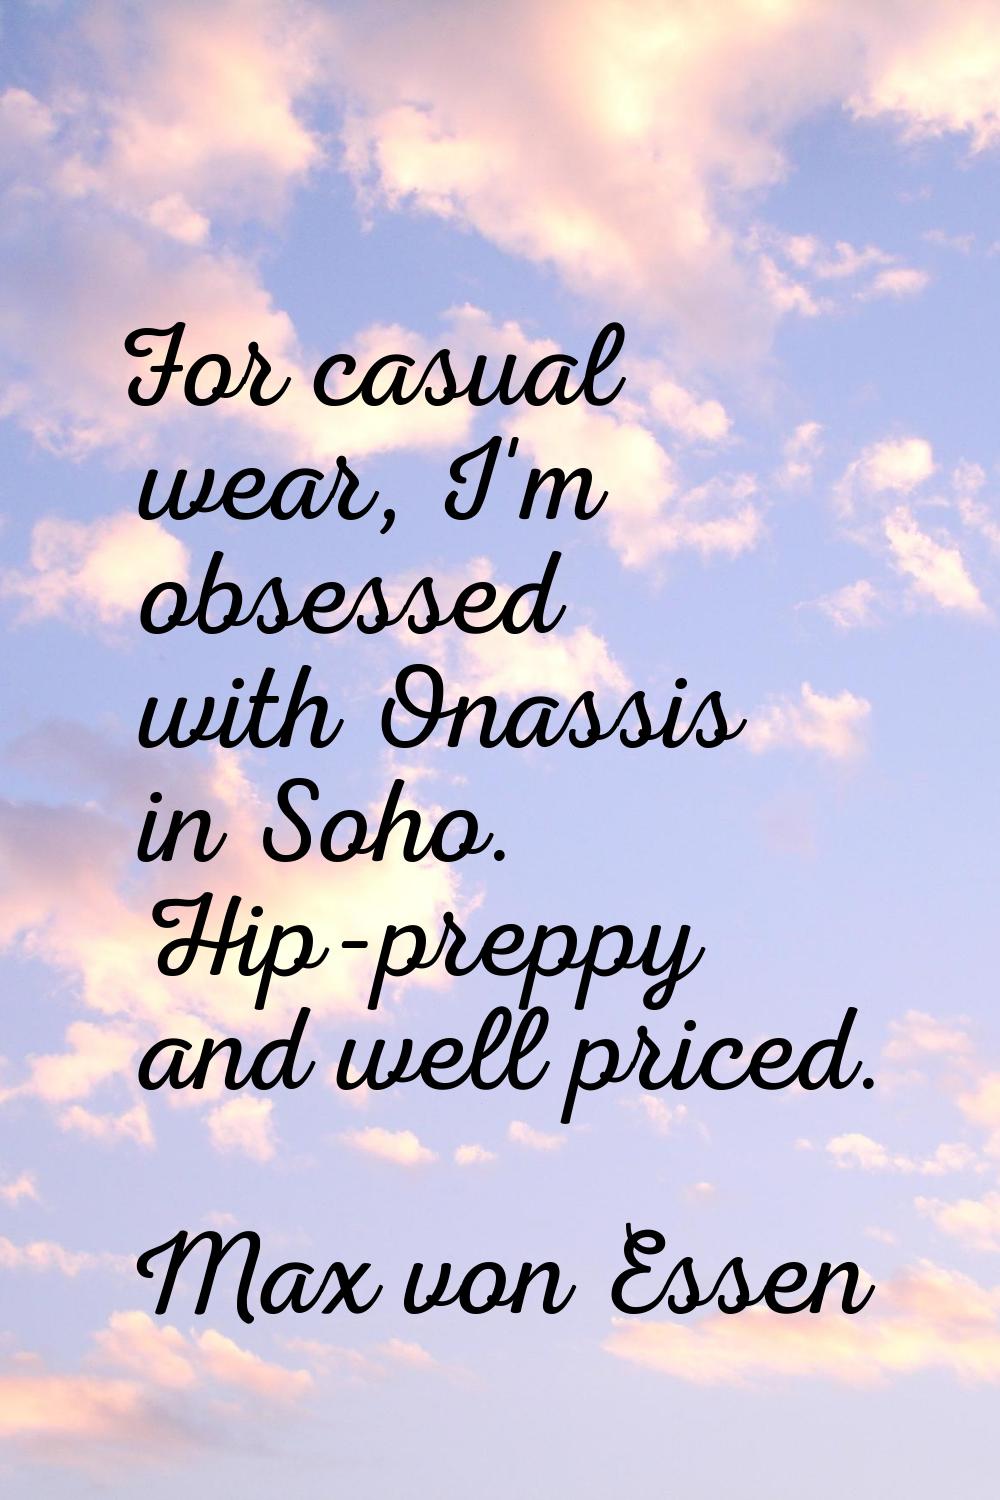 For casual wear, I'm obsessed with Onassis in Soho. Hip-preppy and well priced.